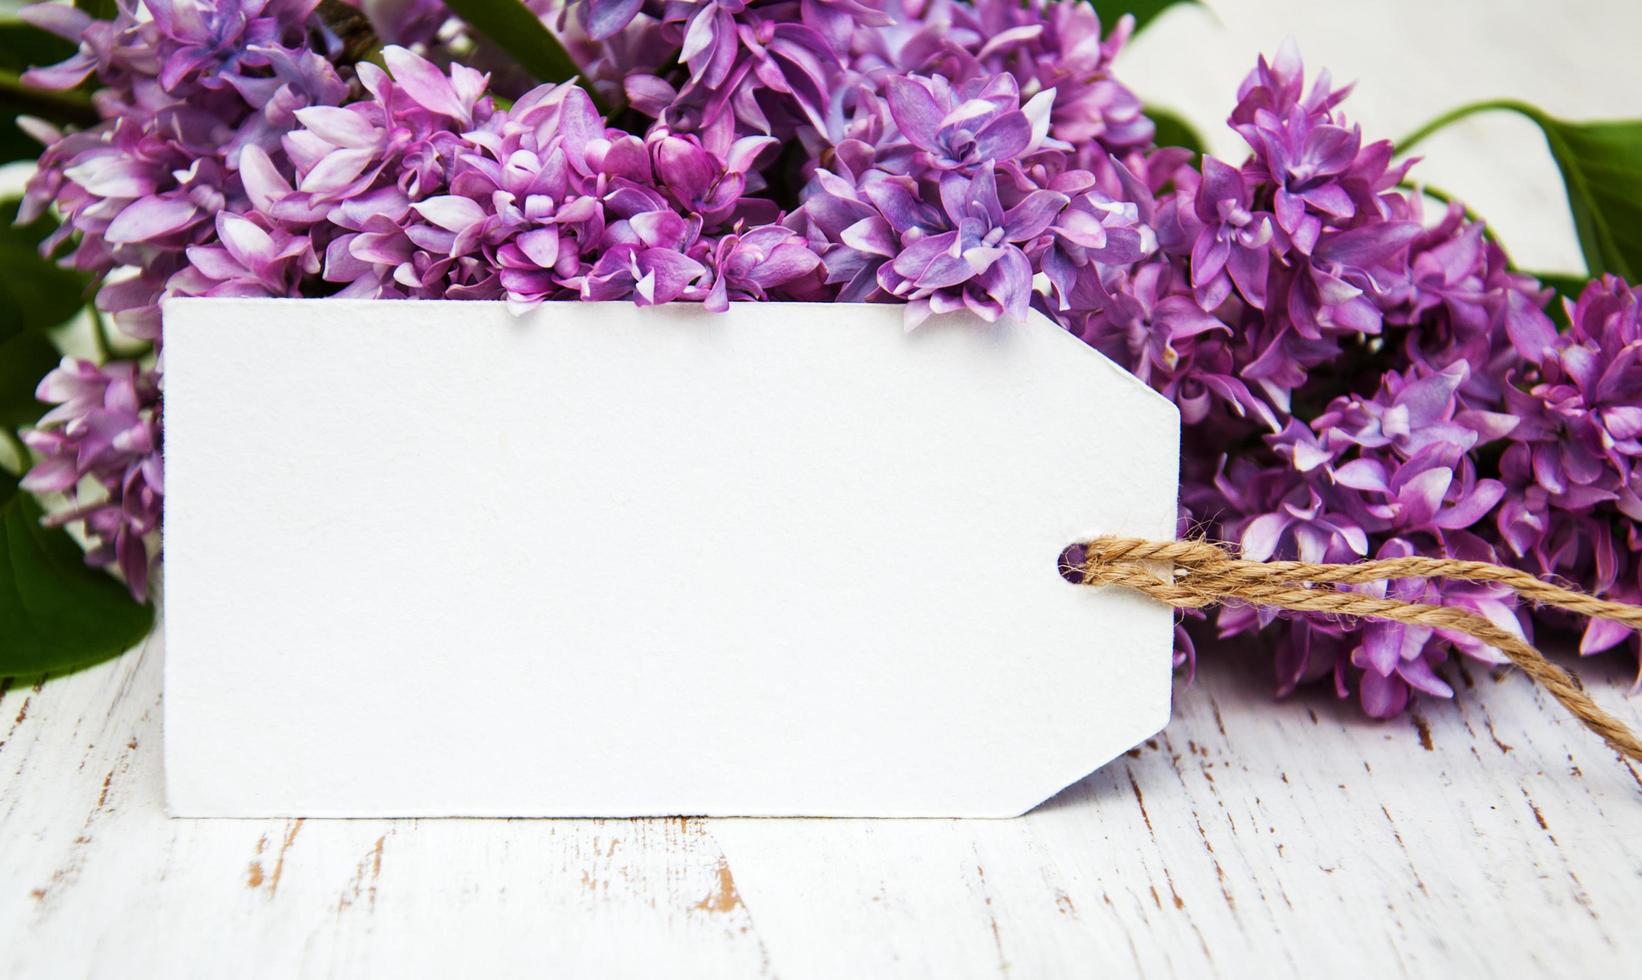 Lilac flowers with an empty tag on an old wooden background photo